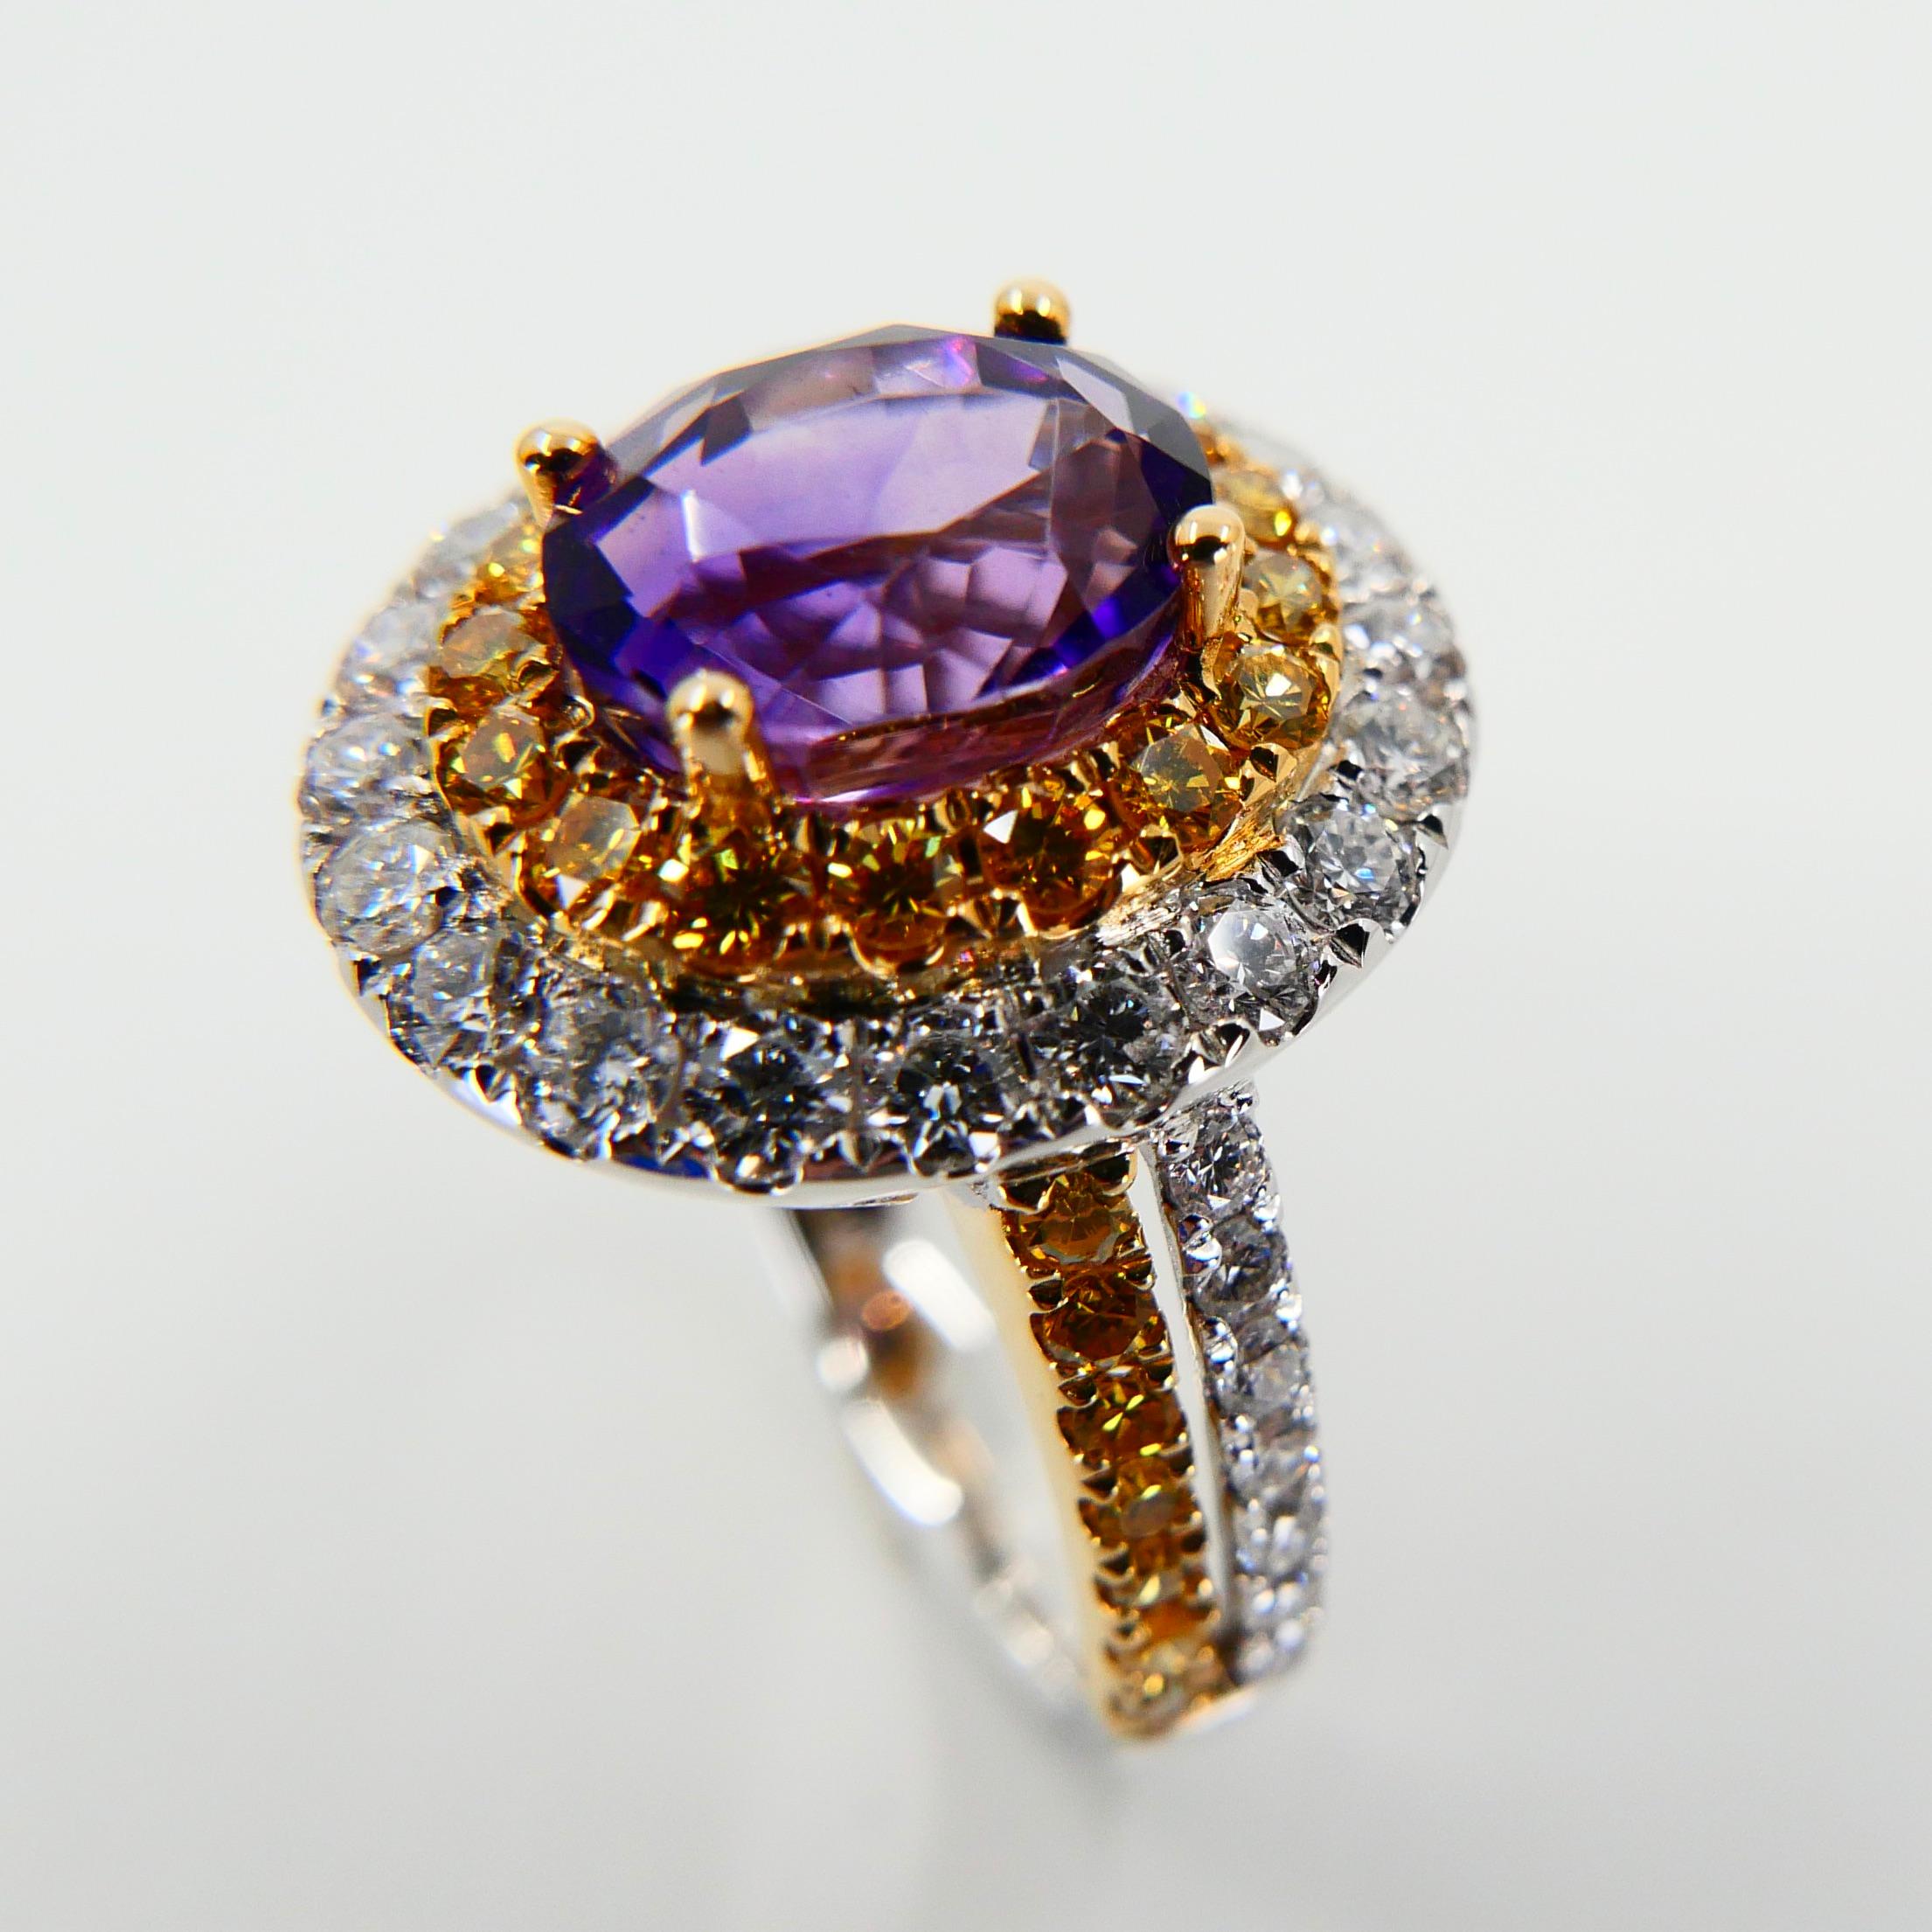 Women's 18k White Gold Amethyst Cocktail Ring with Fancy Vivid Yellow and White Diamonds